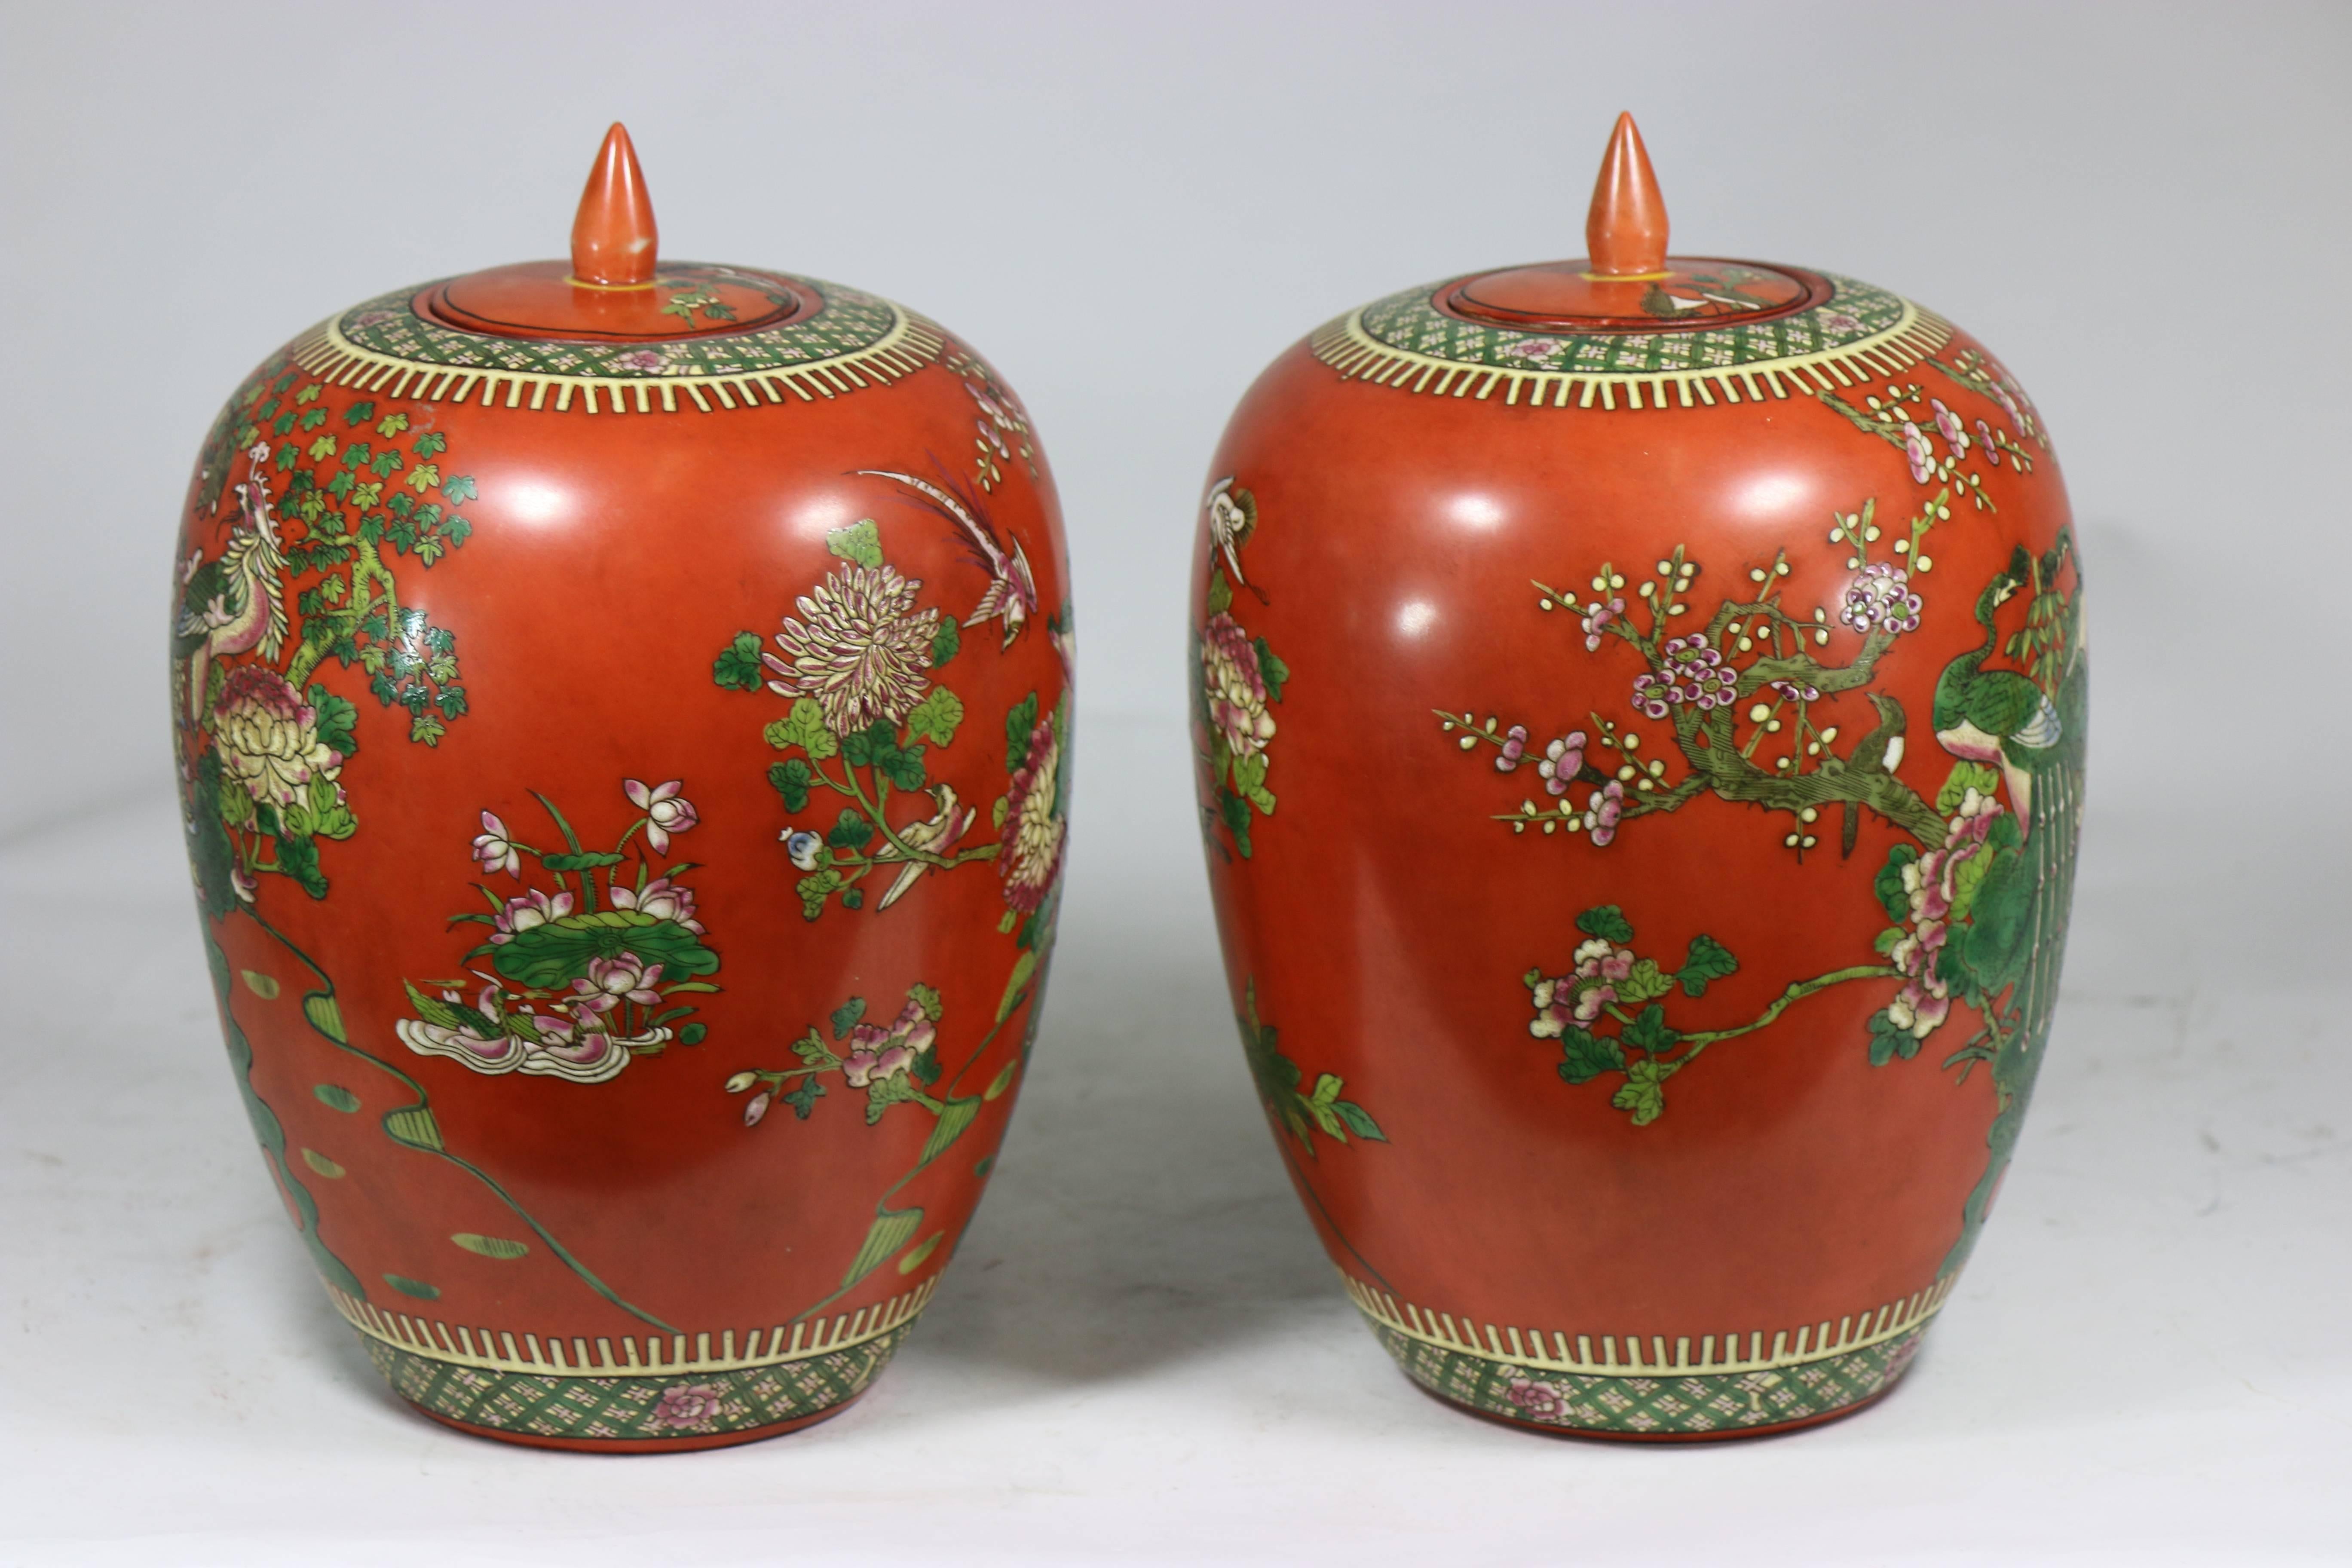 Hand-Painted 19th century Exquisite Pair of Persimmon Porcelain Ginger Jars- Qing Dynasty For Sale